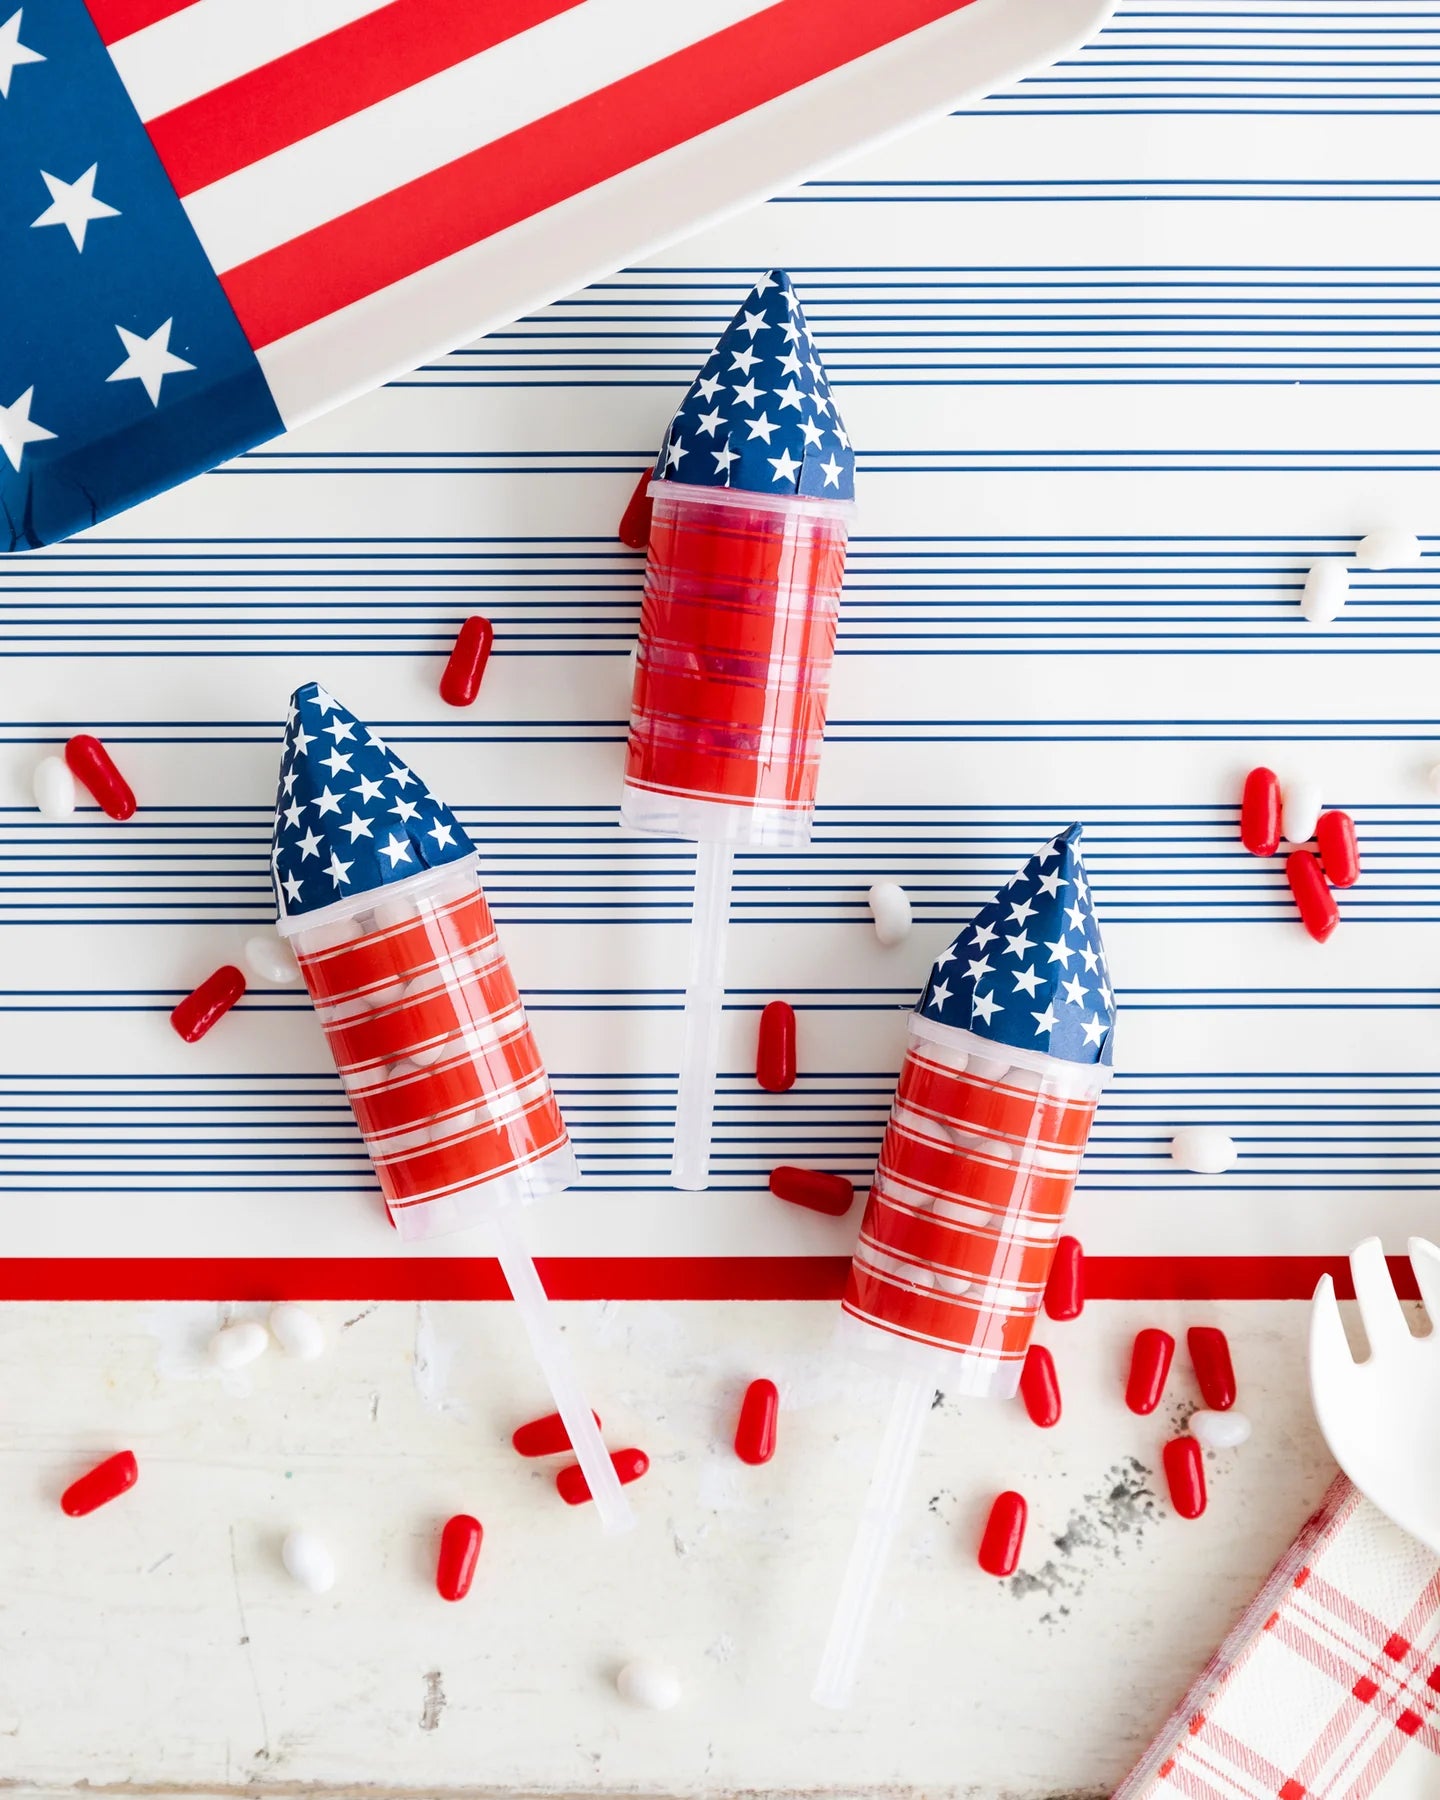 DIY 4th of July Rocket Confetti Poppers 8ct | The Party Darling